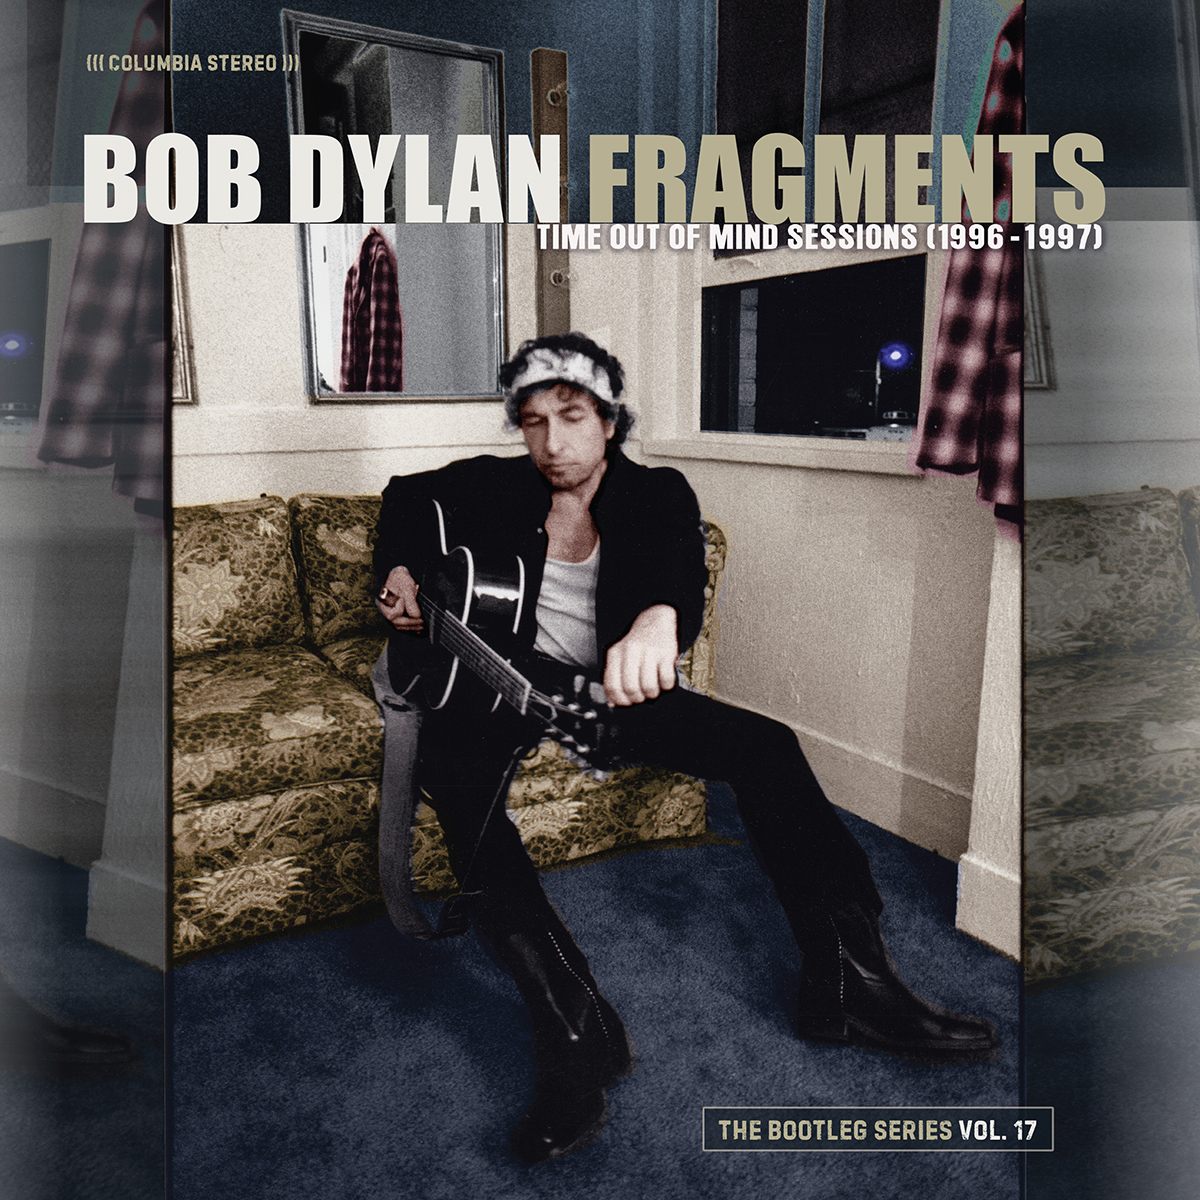 Fragments &#8211; Time Out of Mind Sessions (1996-1997): The Bootleg Series Vol.17